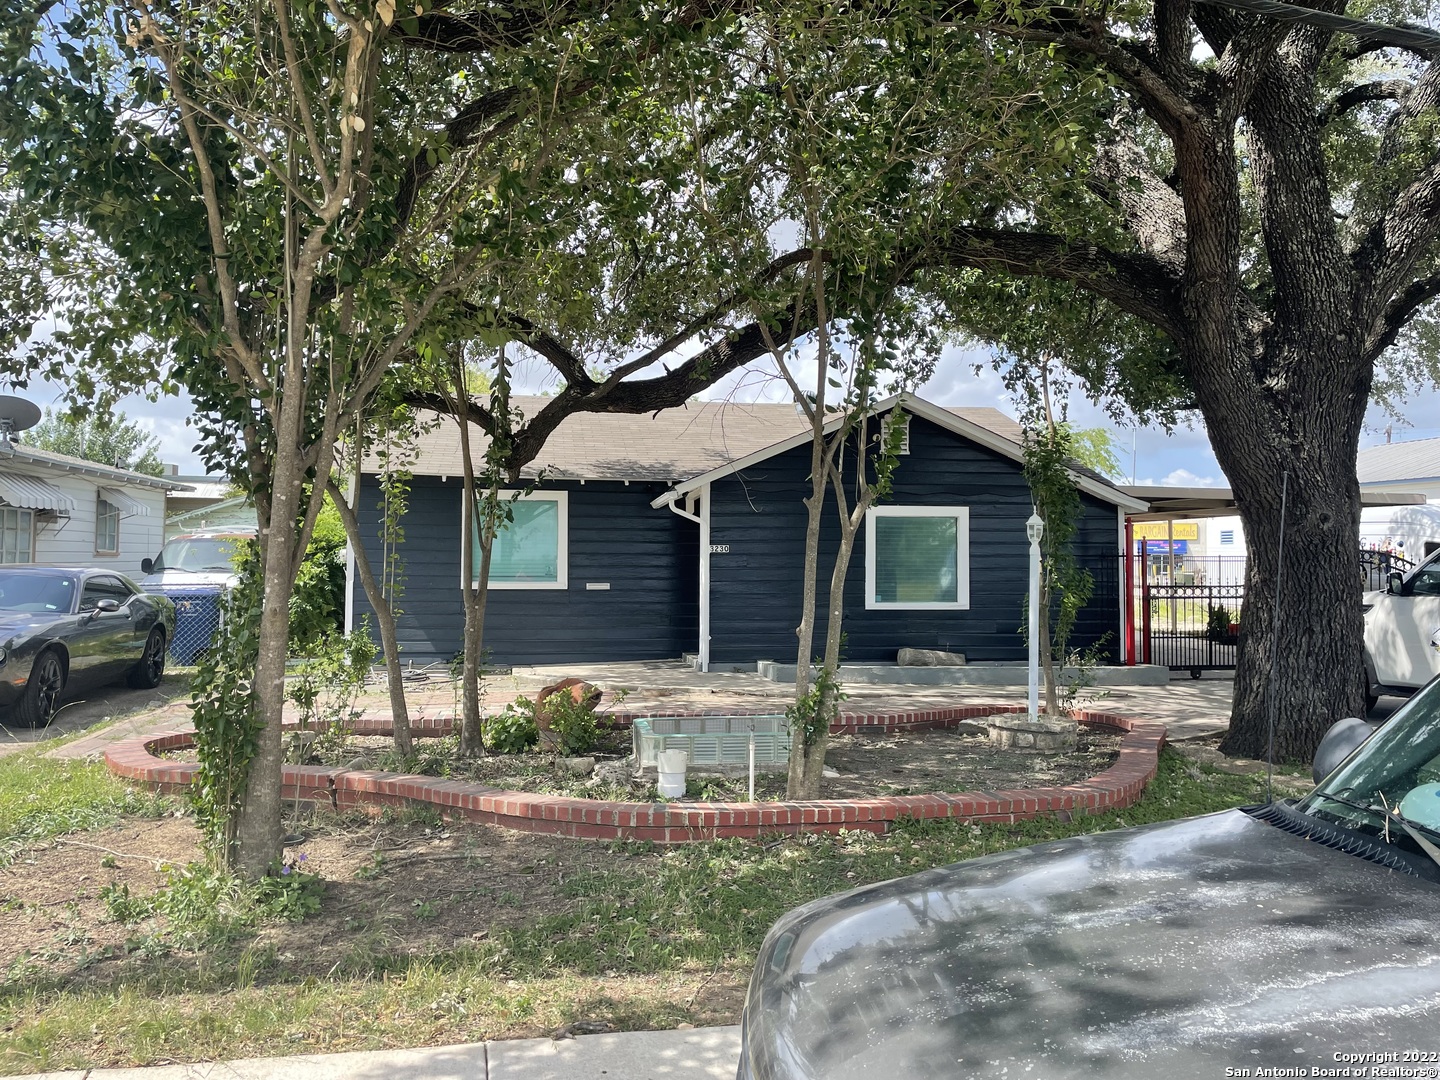 Come take a look at this wonderful investment home that offers 2 bedrooms/1 bath, and 891 sqft.  Because it is currently being used as a Plumbing Company office, will take a little adjustment back into a home, but this home/retail/office building is located just west of downtown and close to major highways. Centrally located in the center of San Antonio, it is the perfect location for a starter home, or small, new start up company. Property in need of a little TLC, but sits on 2 lots(3230 & 3232 W French Pl), please note property line goes beyond fence.  With the office/retail in front, and connected warehouse space in the back, makes for a very functioning business. Sellers are very motivated and ready to entertain all offers. Schedule your showing today.